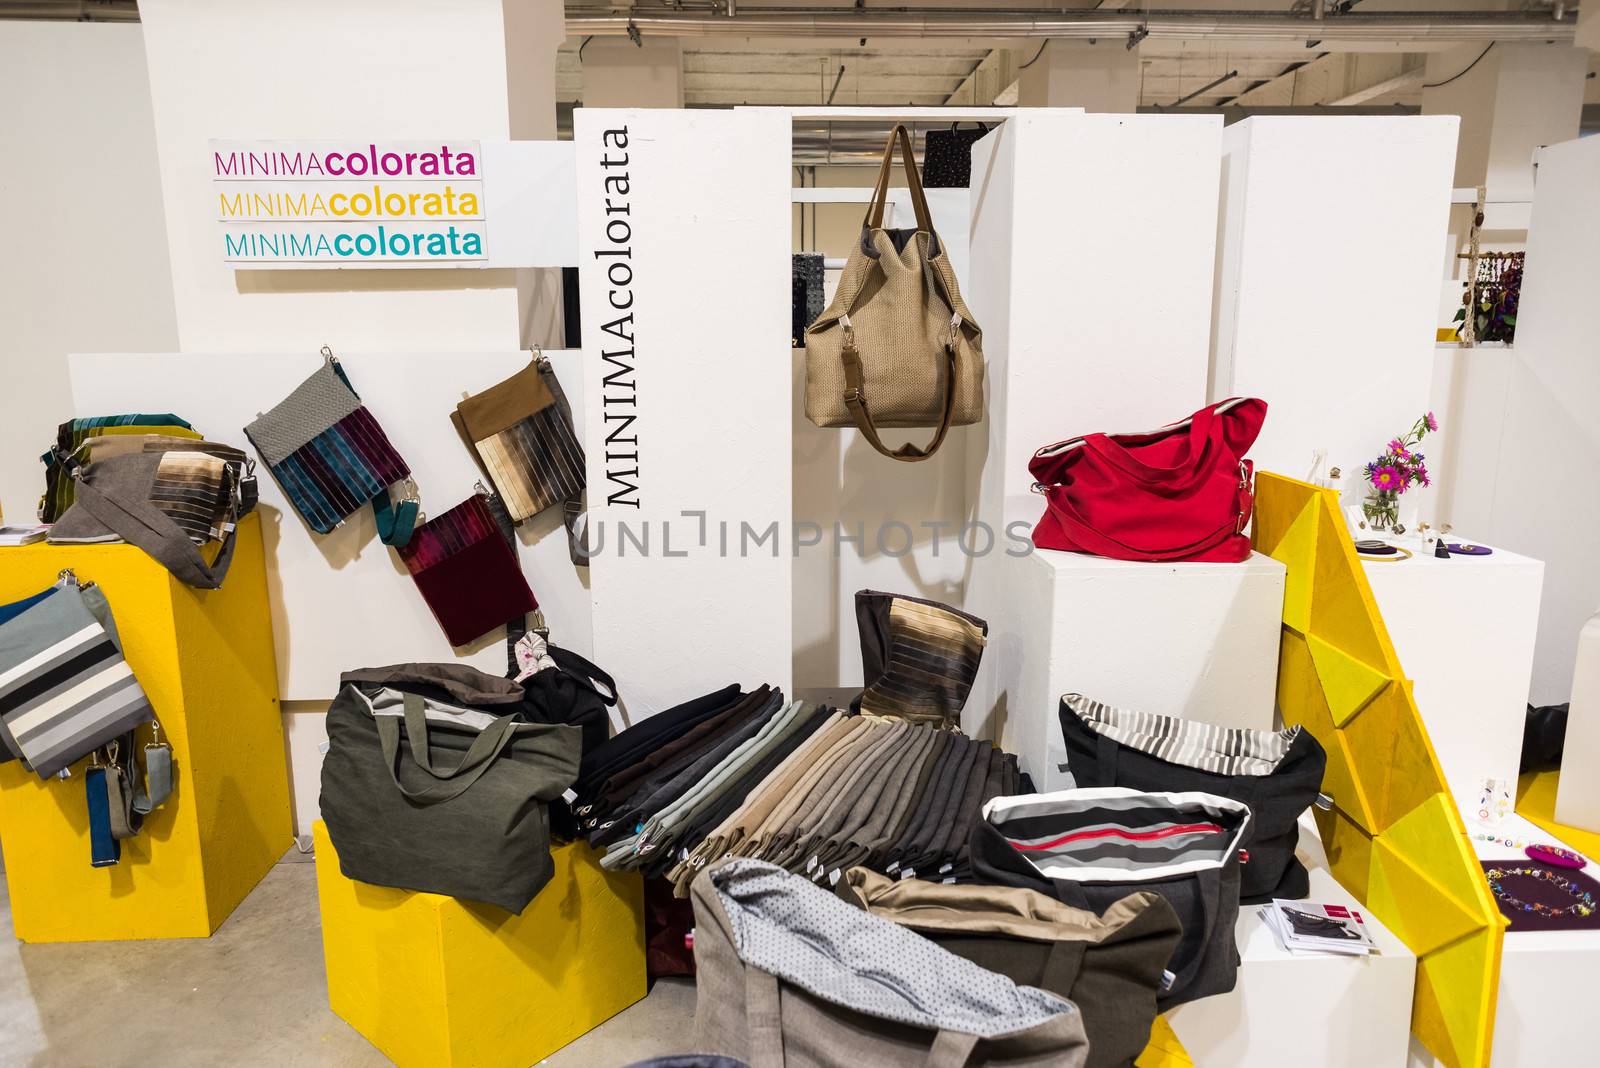 So Critical So Fashion exhibition in Milan on September 20, 2013 by peus